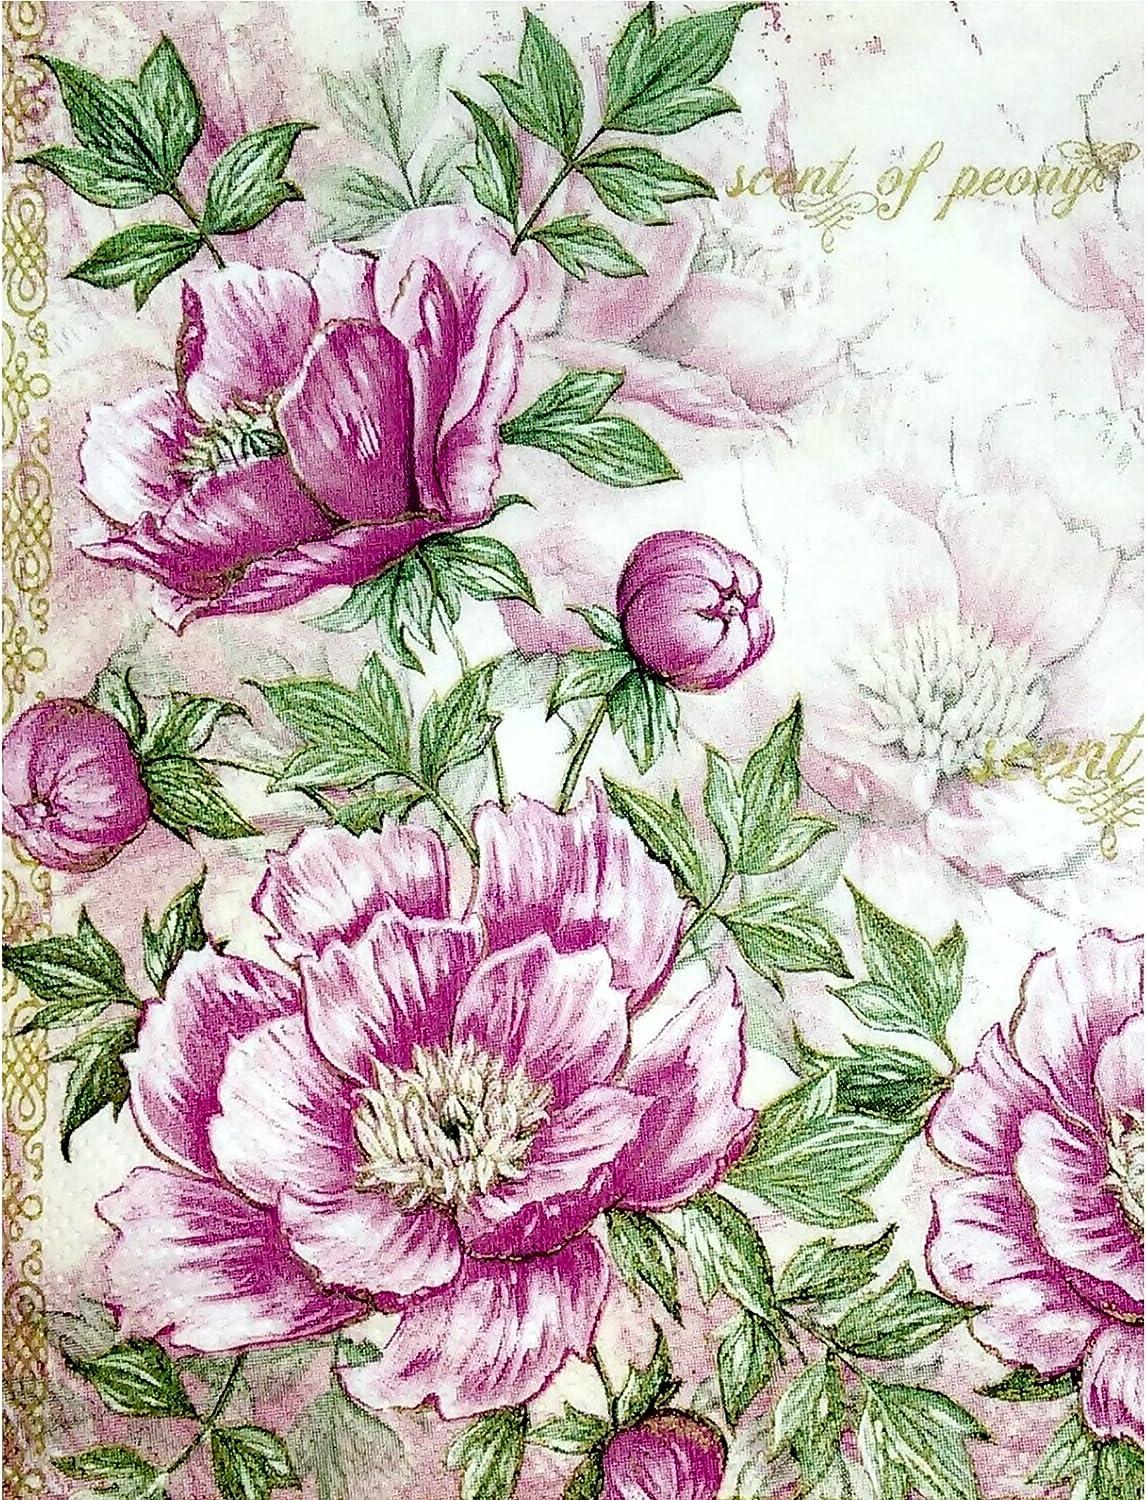 Vintage Flower Theme Mulberry Rice Paper, 8 x 10.5 inch - 6 x Different  Printed Mulberry Paper Images 30gsm Visible Fibres for Decoupage Crafts  Mixed Media Collage Art